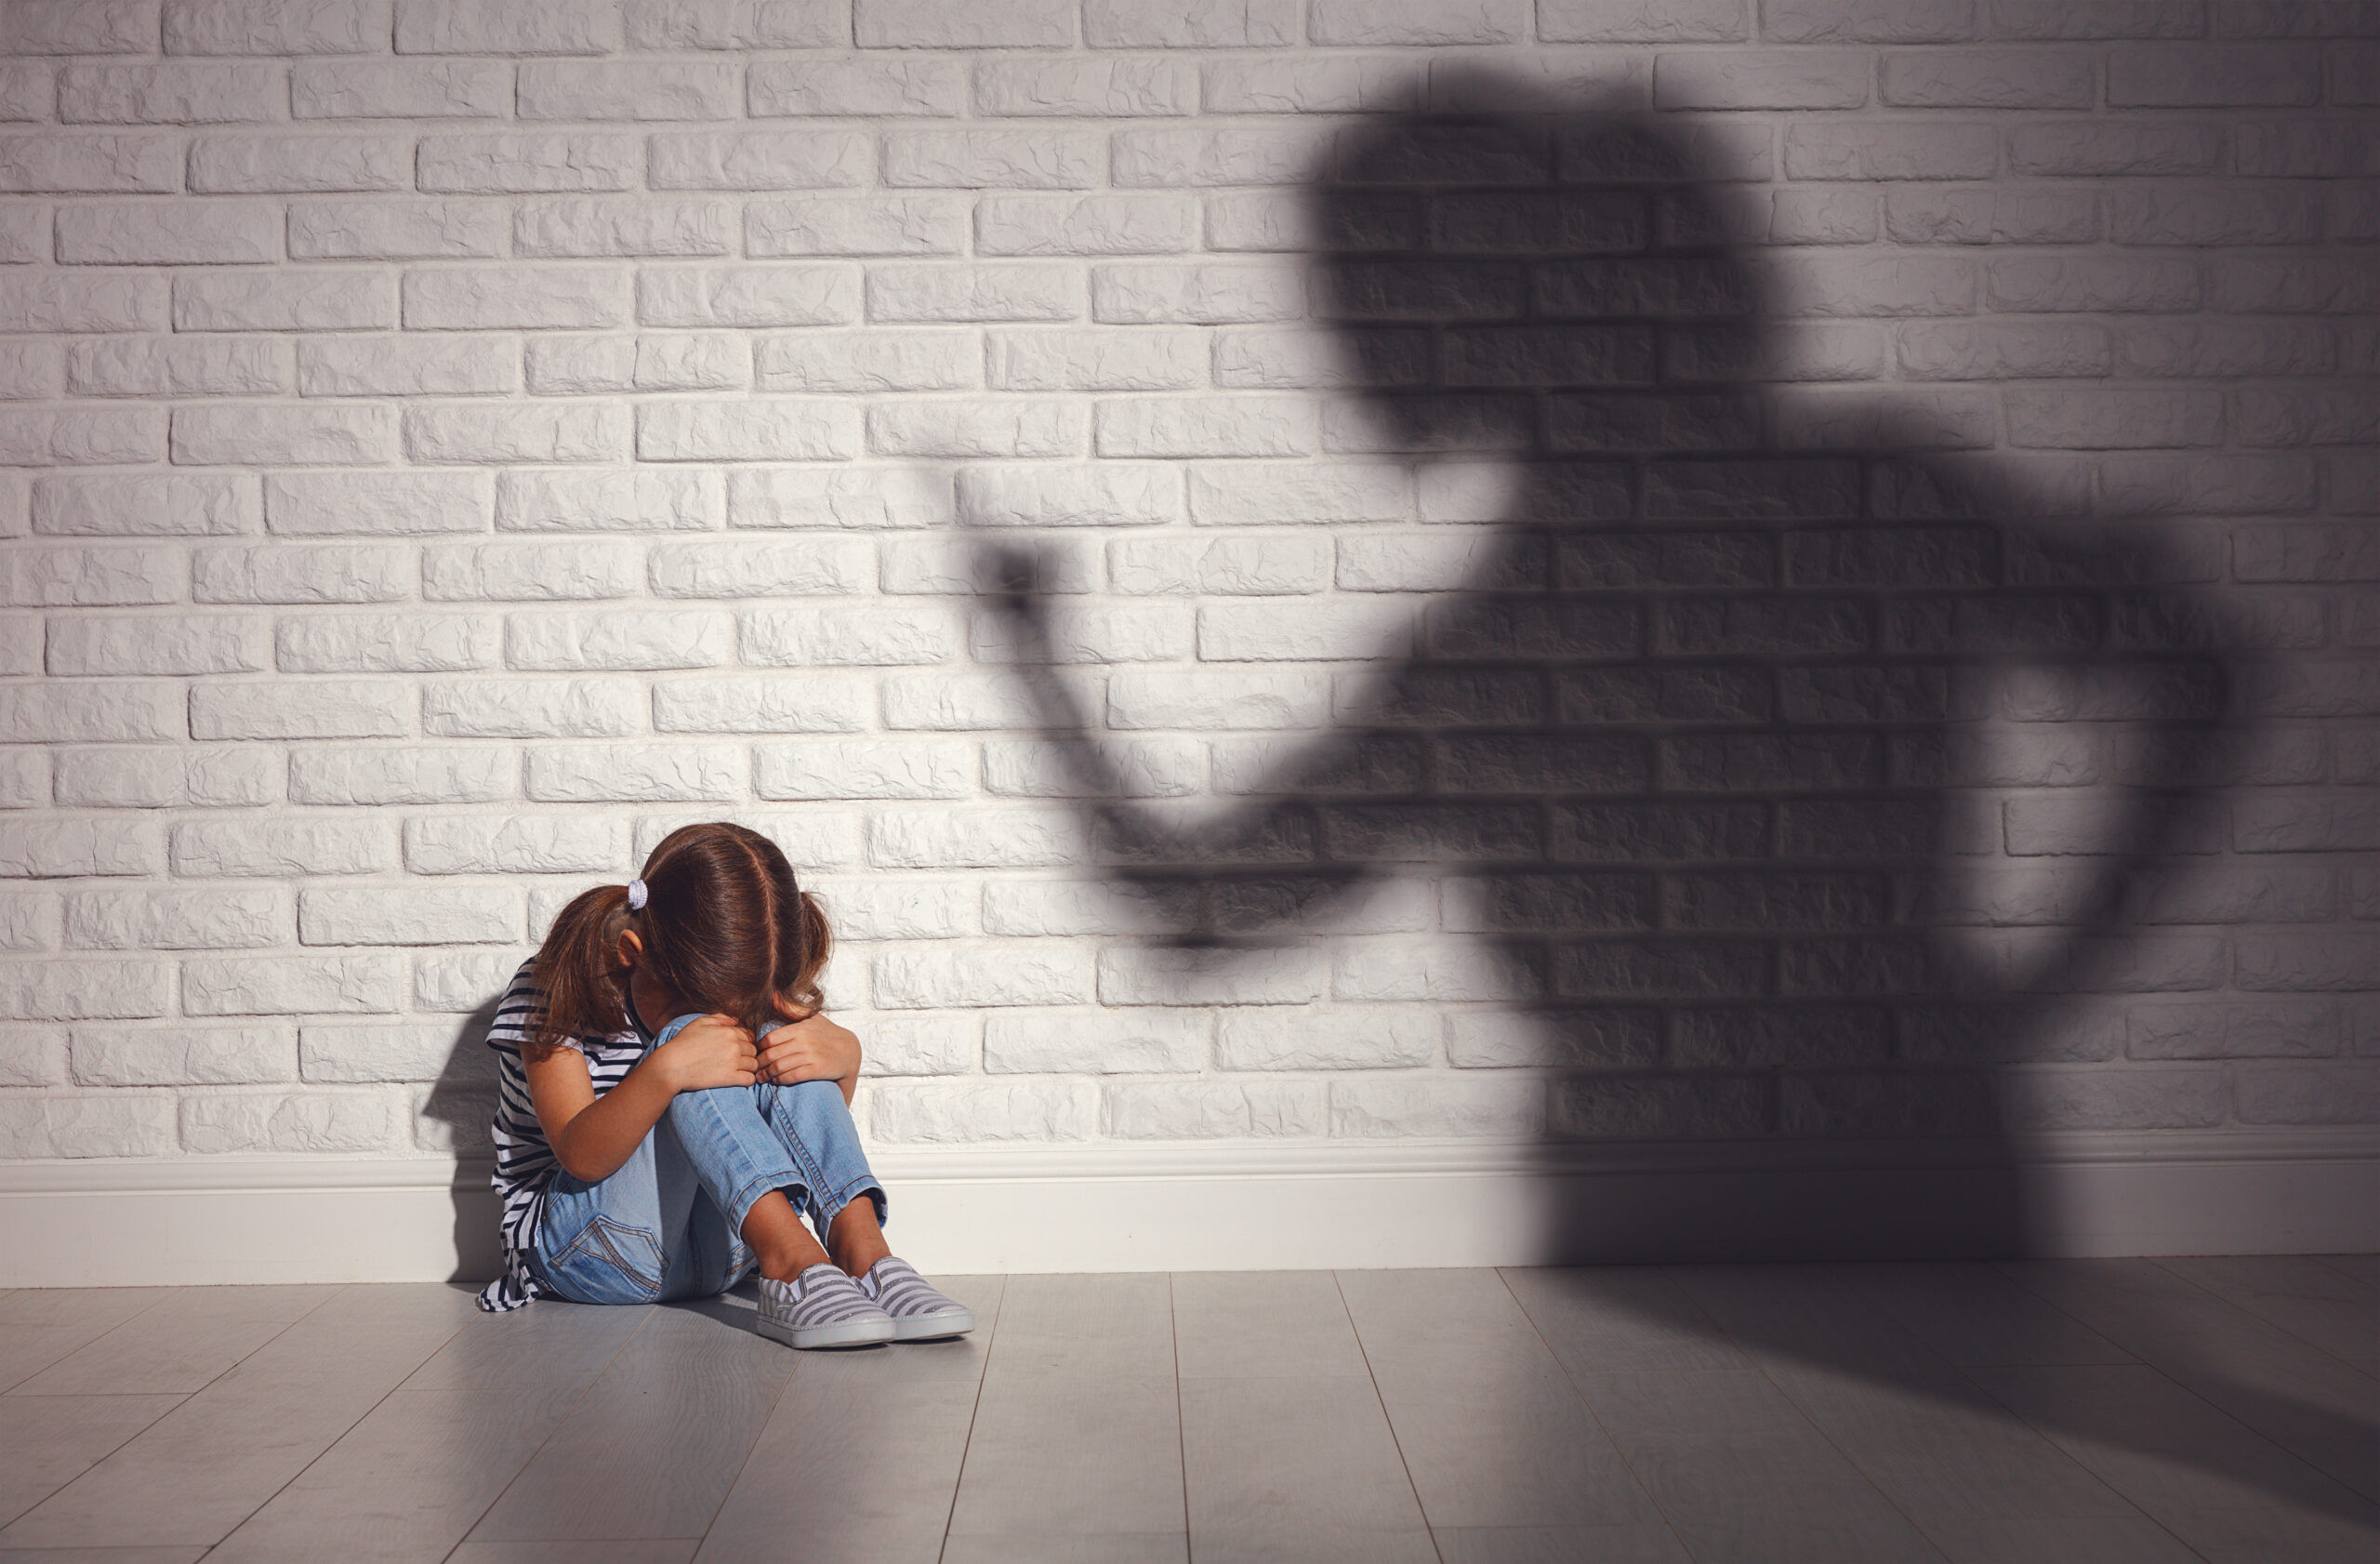 Shadow of an angry parent shouting at a sad kid who sits against a brick wall